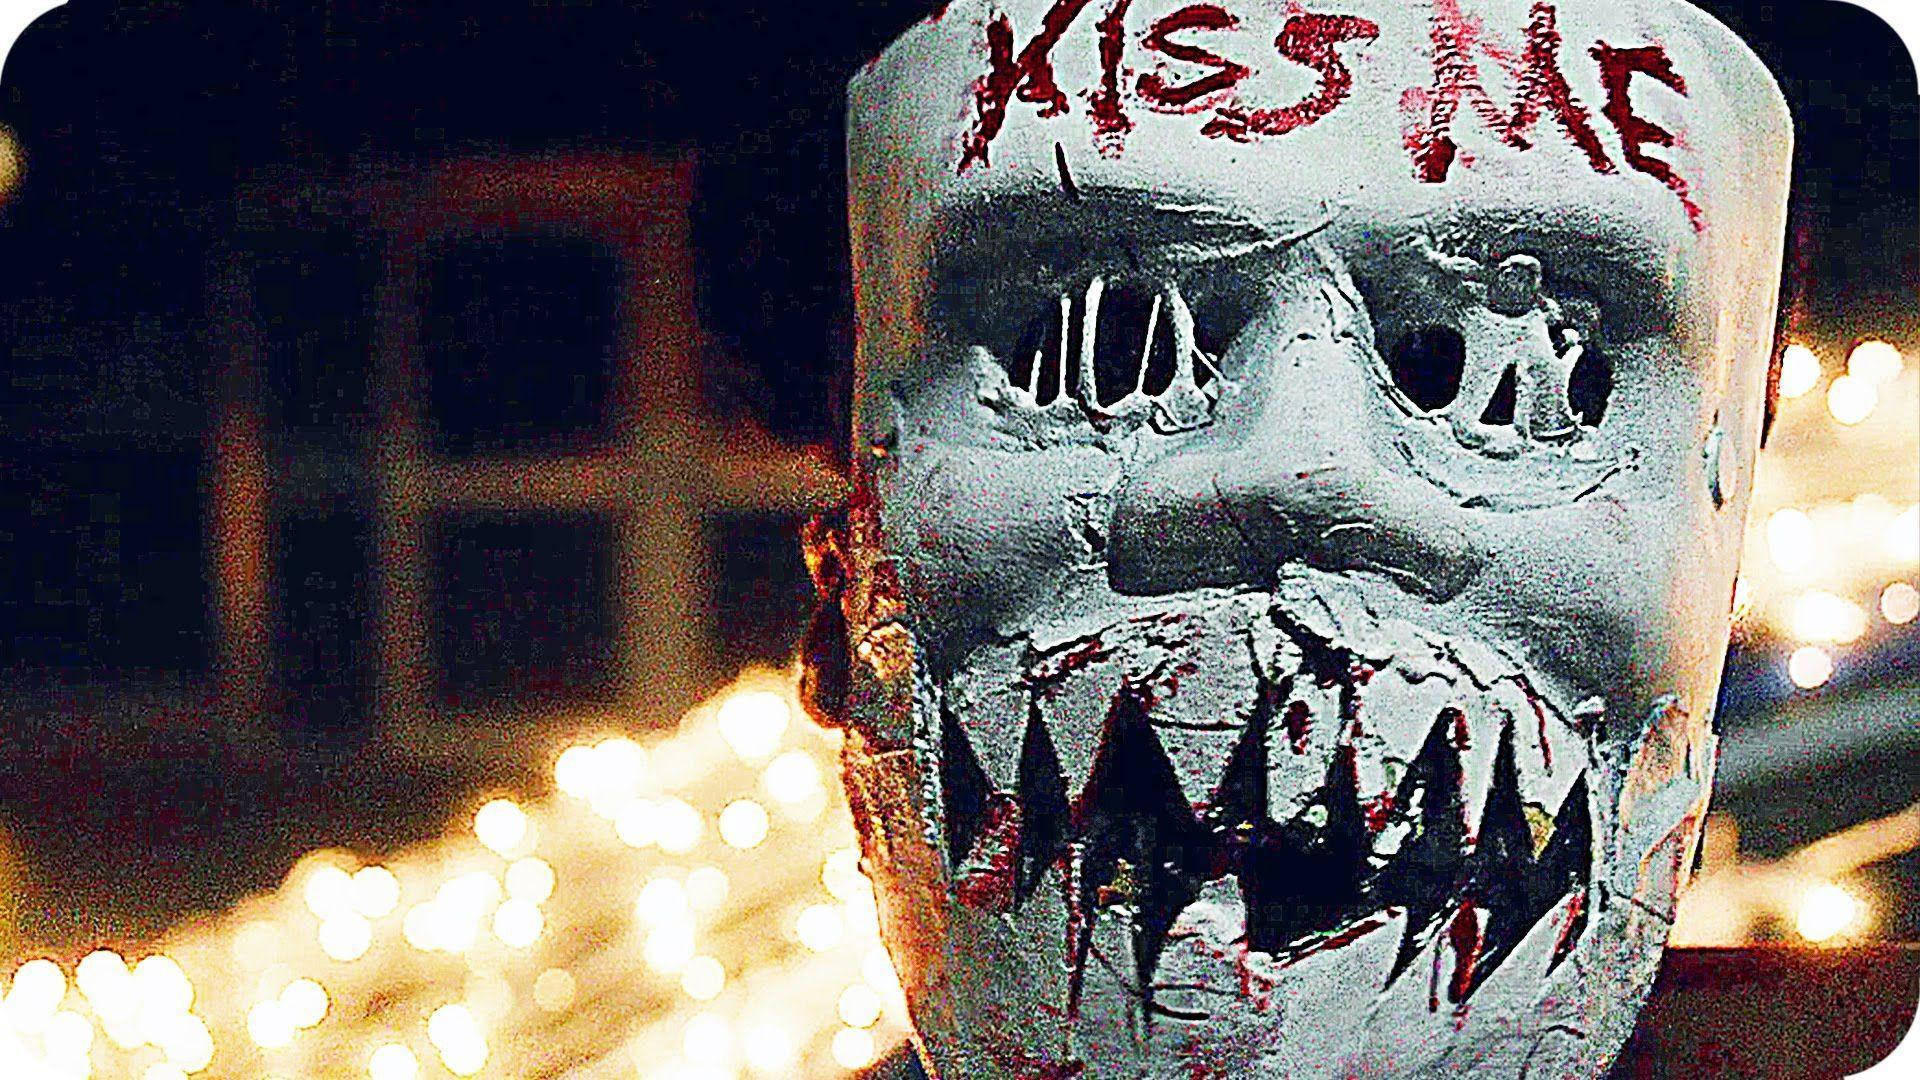 Intense Moment From The Purge Showcasing The Infamous 'kiss Me' Mask Background